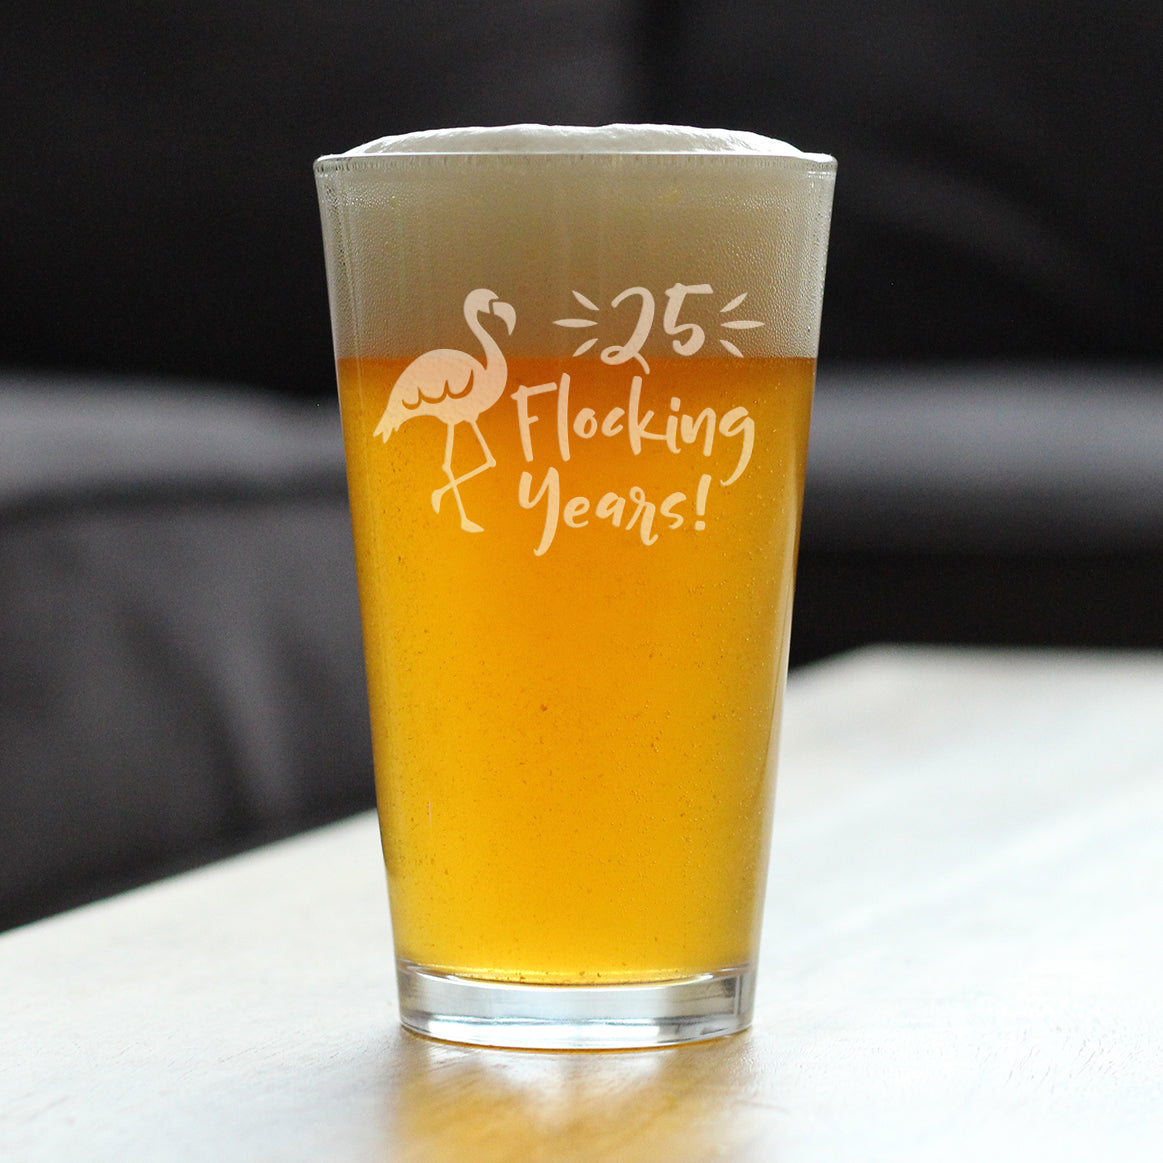 25 Flocking Years Funny Pint Glass, 16 Oz, Etched Sayings, Cute Twenty-Fifth Anniversary or Birthday Gift for Flamingo Lovers